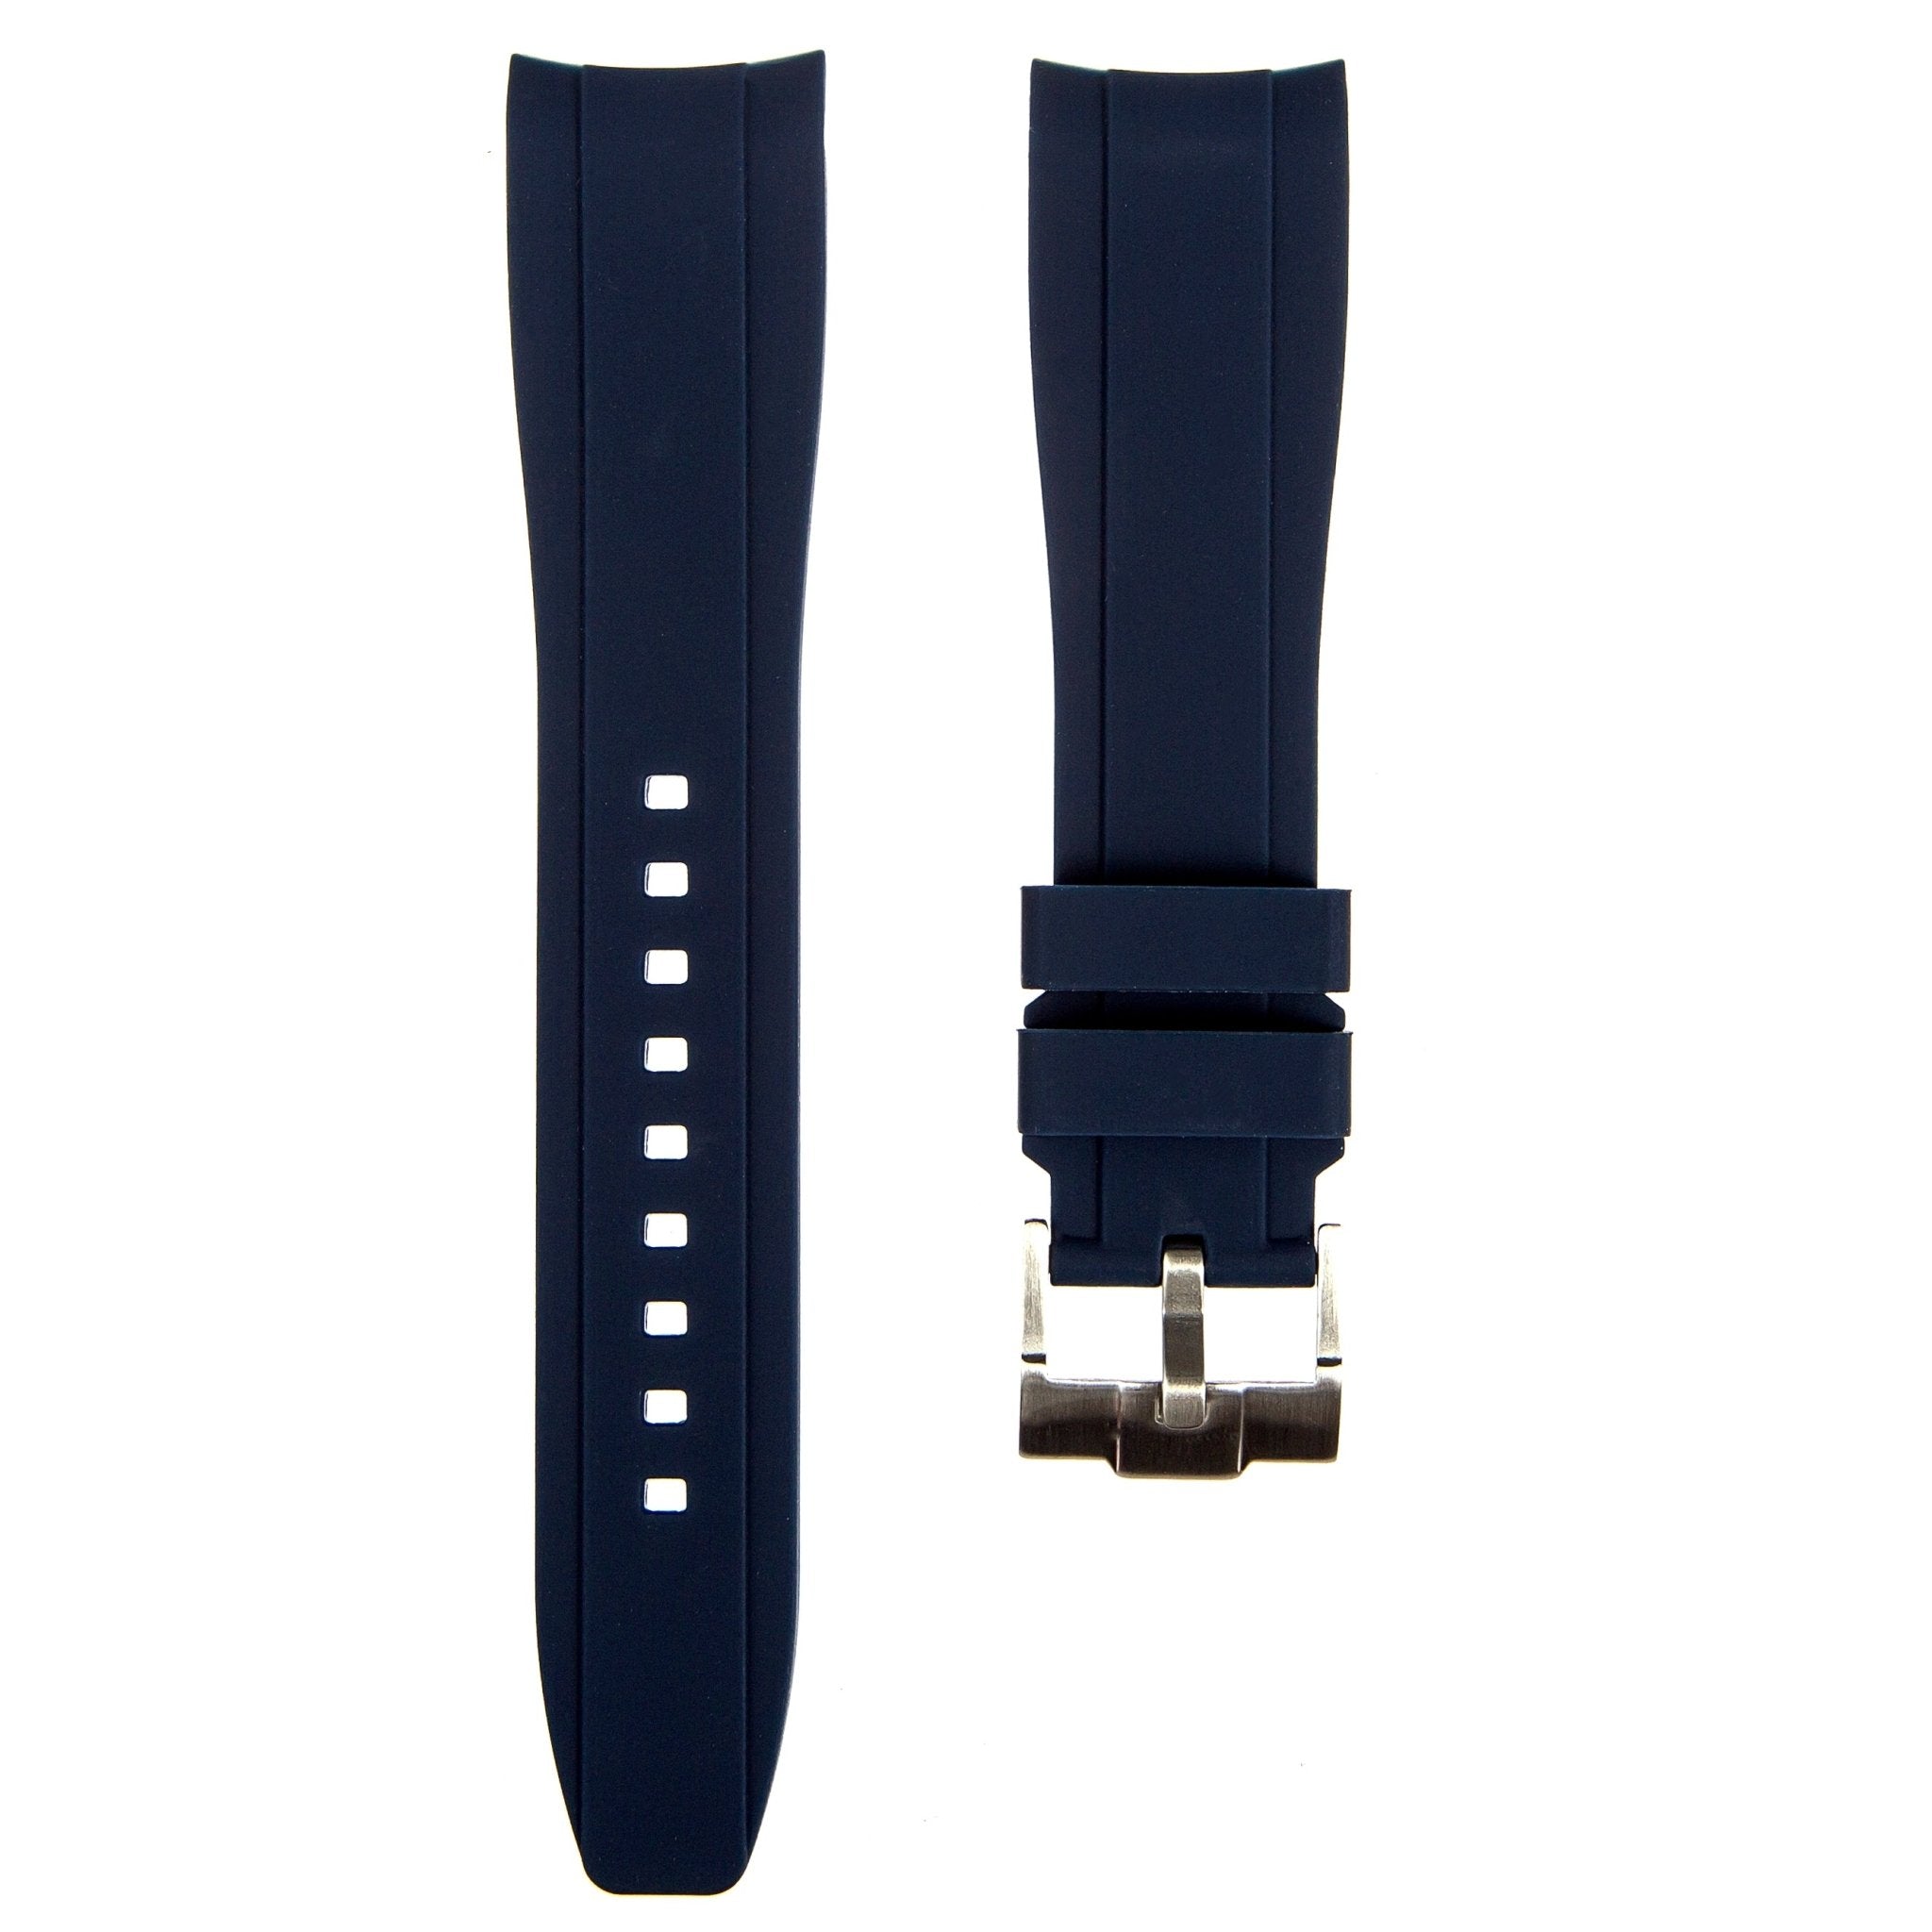 Curved End Soft Silicone Strap - Compatible with Blancpain x Swatch – Navy (2418) -StrapSeeker